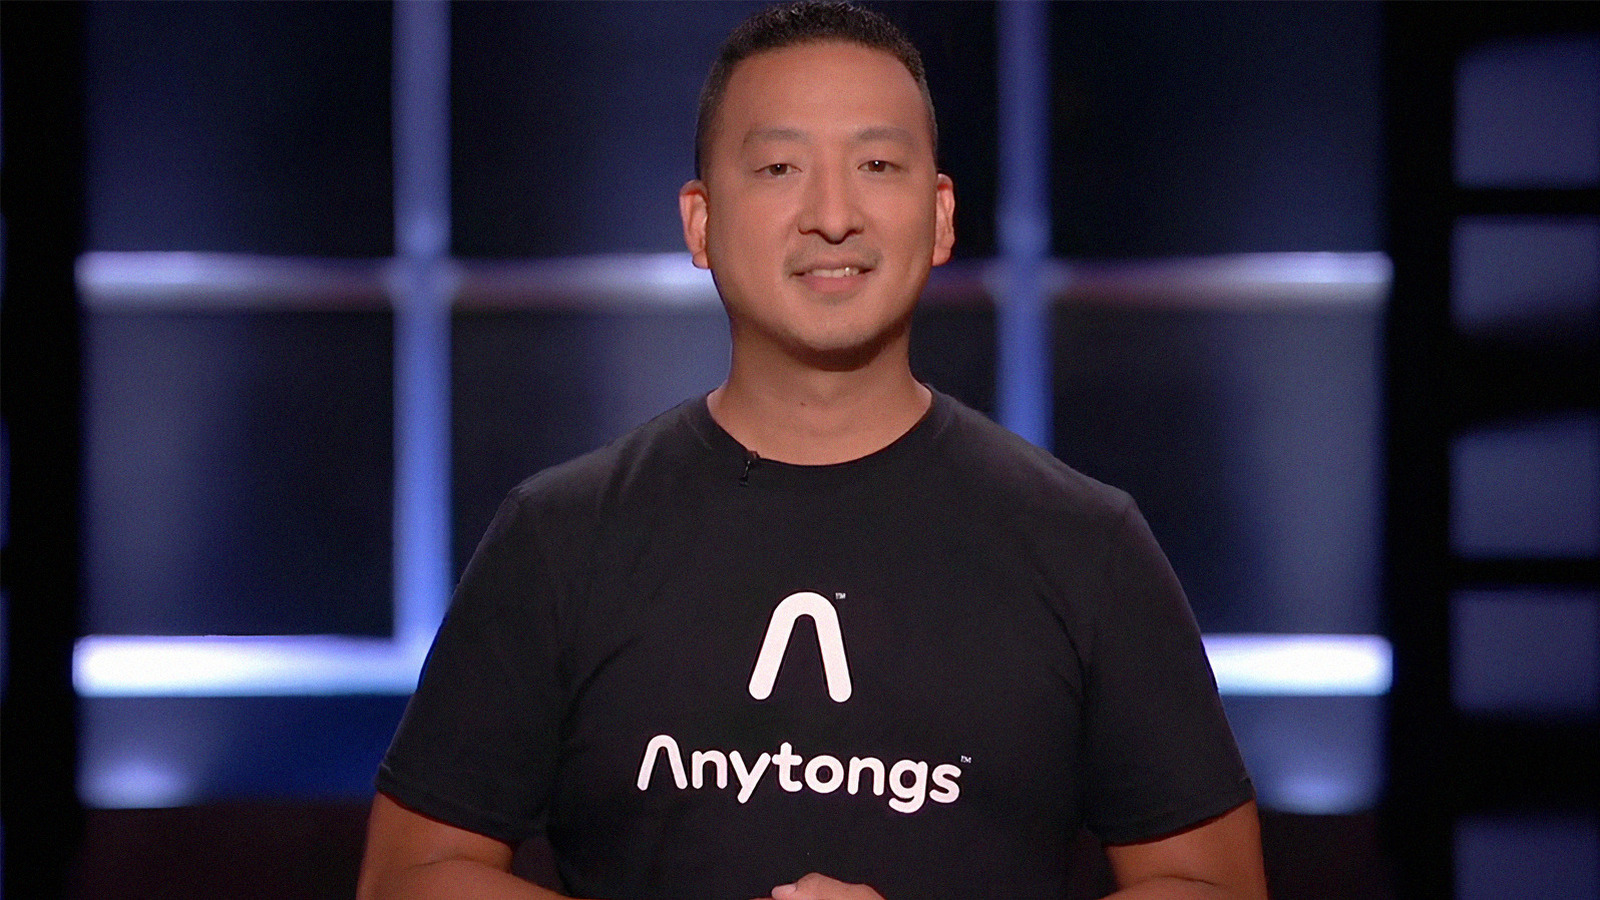 Whatever Happened To Anytongs After Shark Tank?